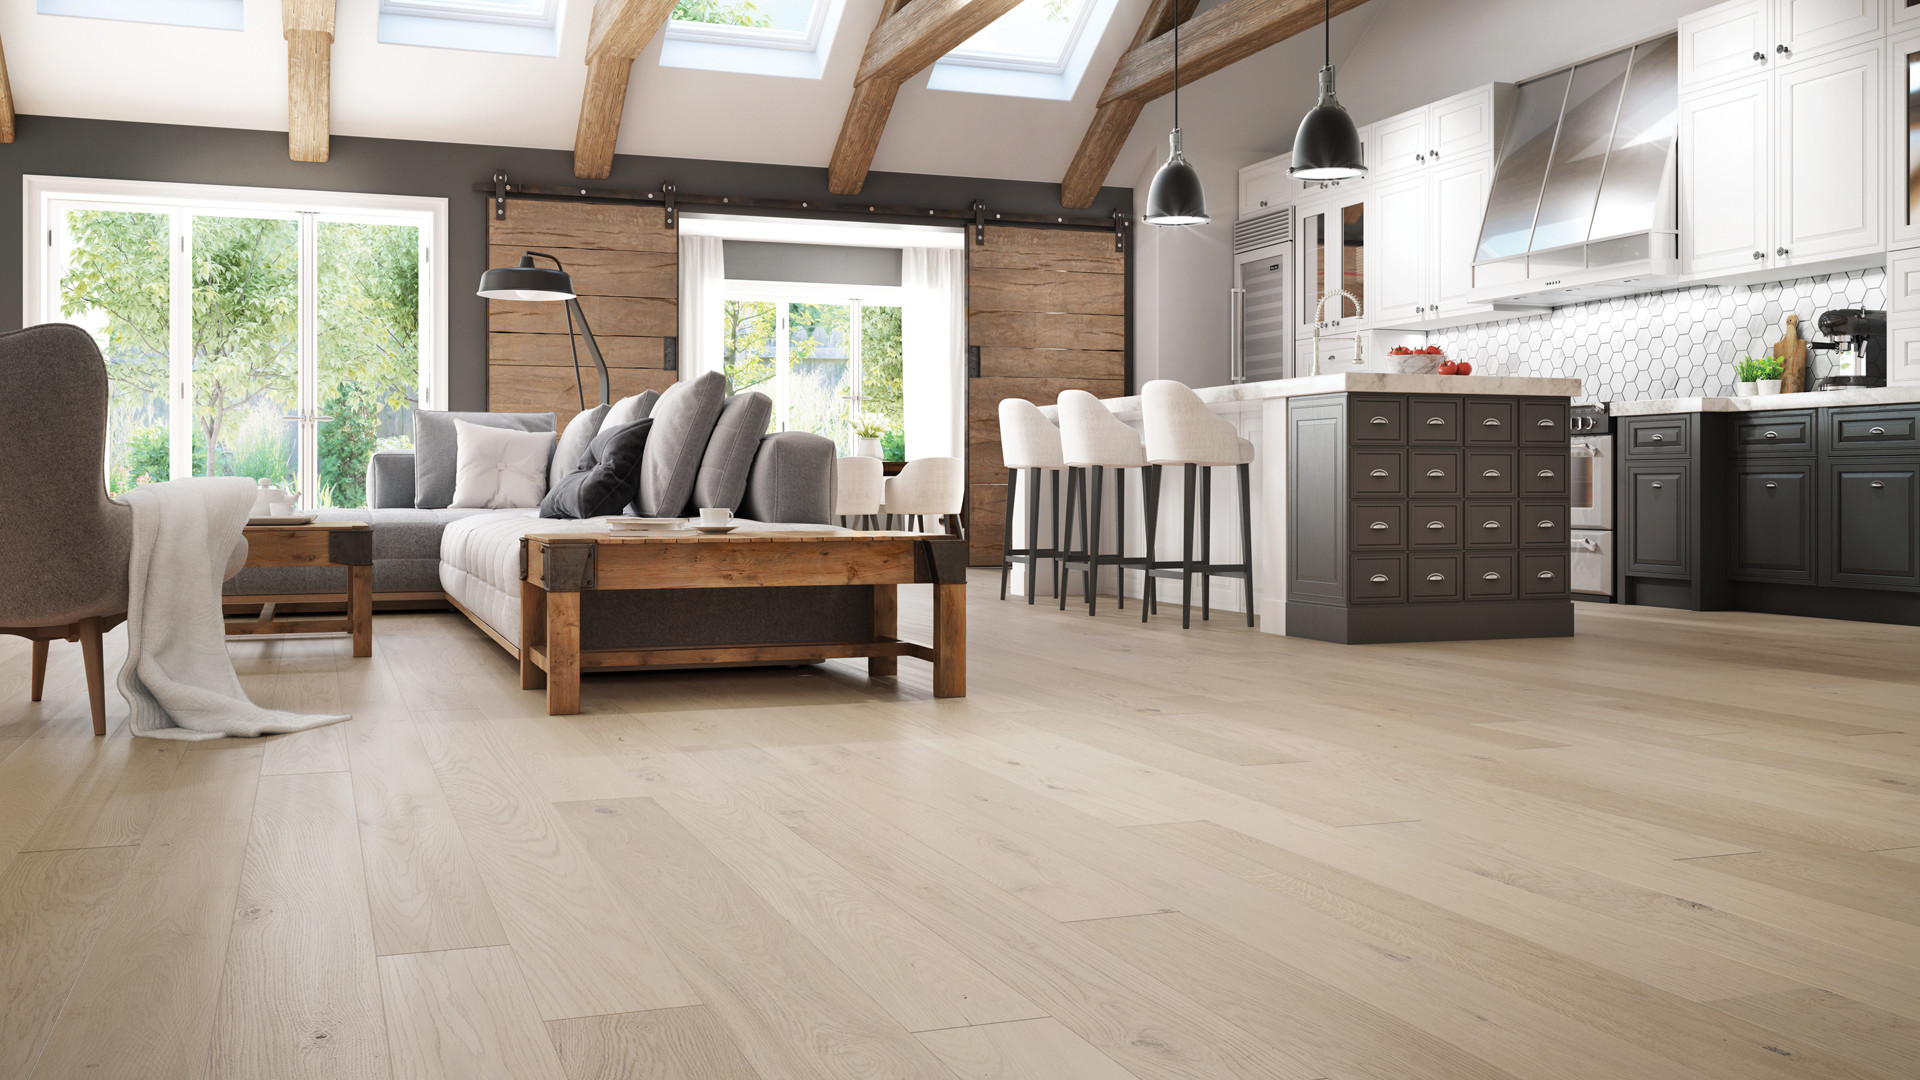 26 Unique 1 1 4 Hardwood Flooring 2024 free download 1 1 4 hardwood flooring of 4 latest hardwood flooring trends of 2018 lauzon flooring intended for this technology brings your hardwood floors and well being to a new level by improving indoo